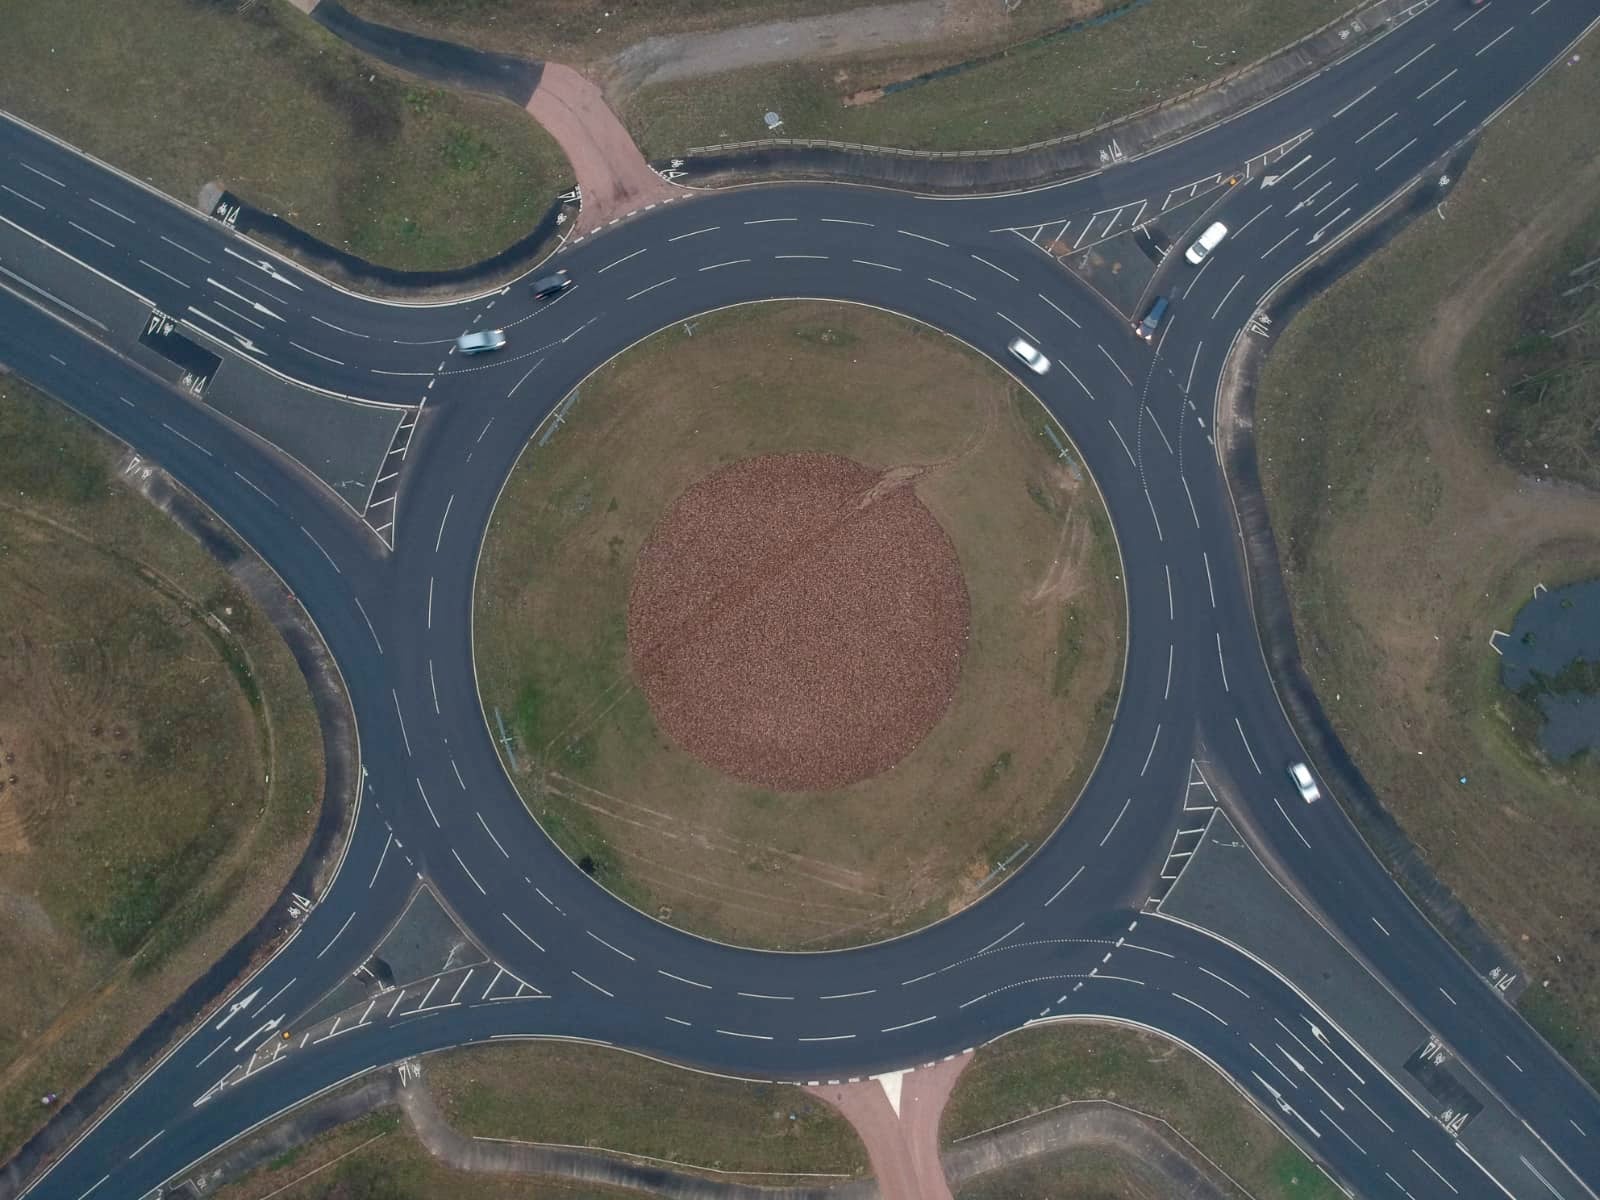 The NDR roundabout at Sprowston, which causes many drivers to be confused about which lane to use.